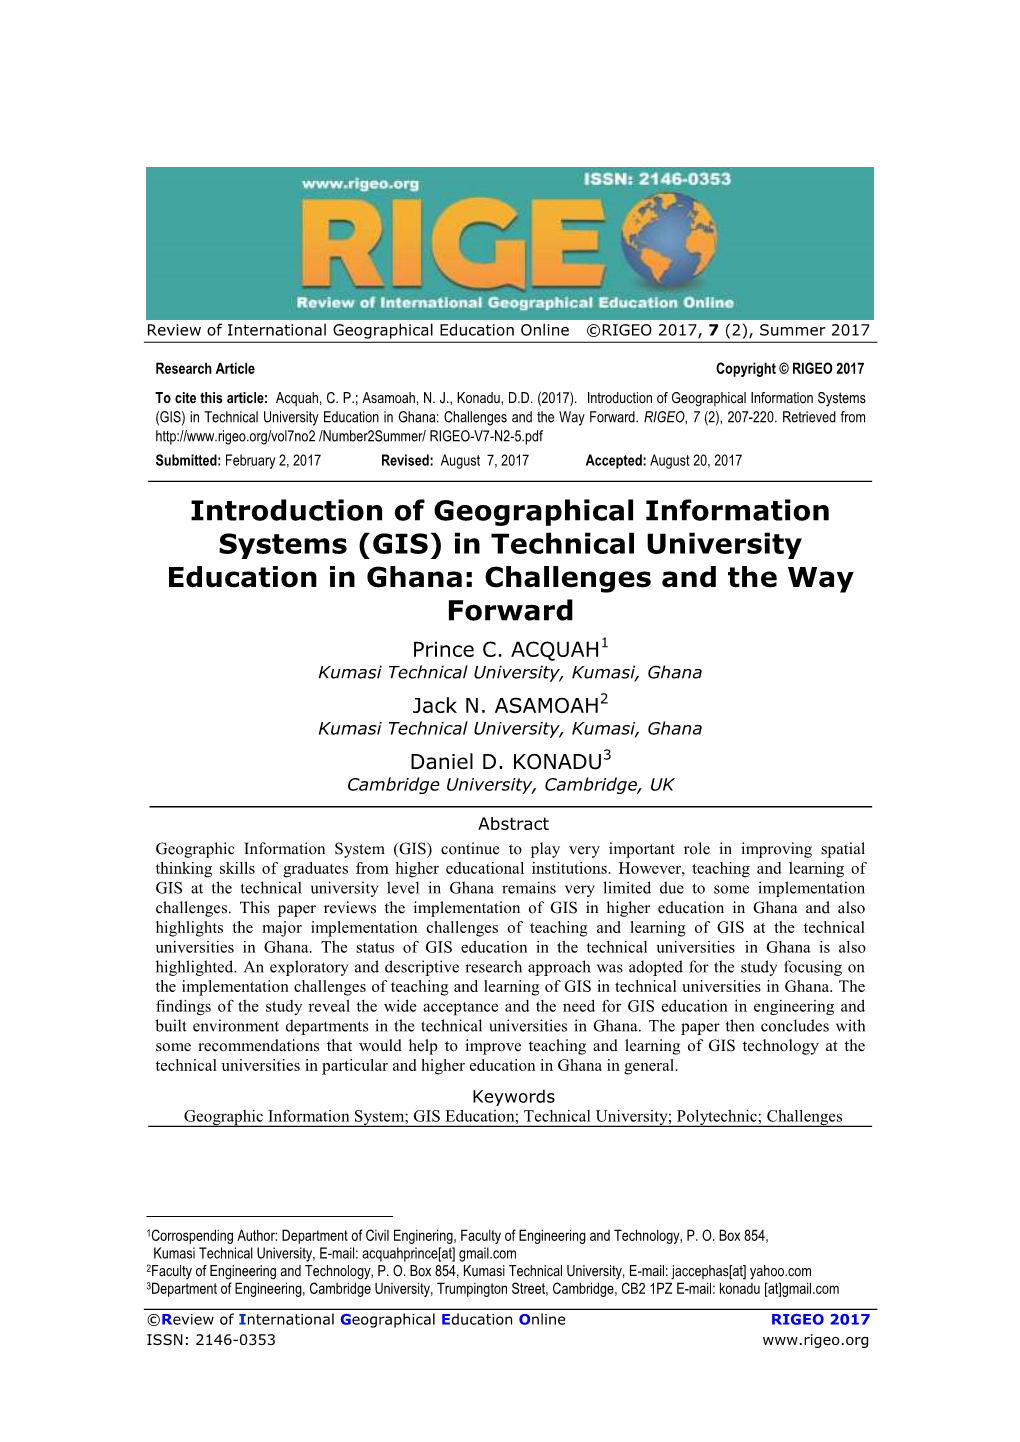 Introduction of Geographical Information Systems (GIS) in Technical University Education in Ghana: Challenges and the Way Forward